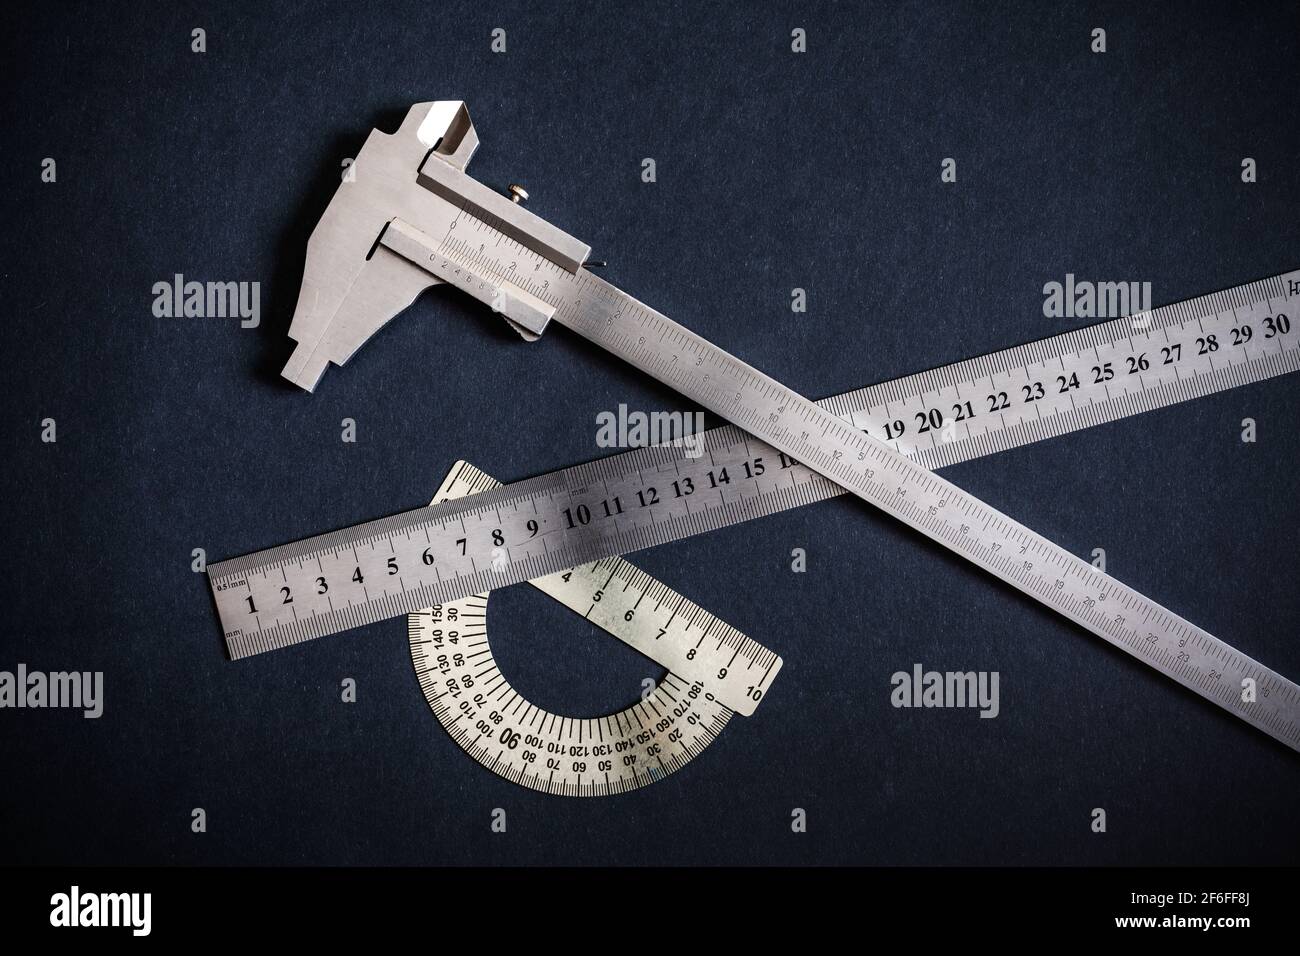 Goniometer and Ruler and Vernier caliper three types on dark grey-black patterns background. Non-color, monochrome black and white photo. Stock Photo